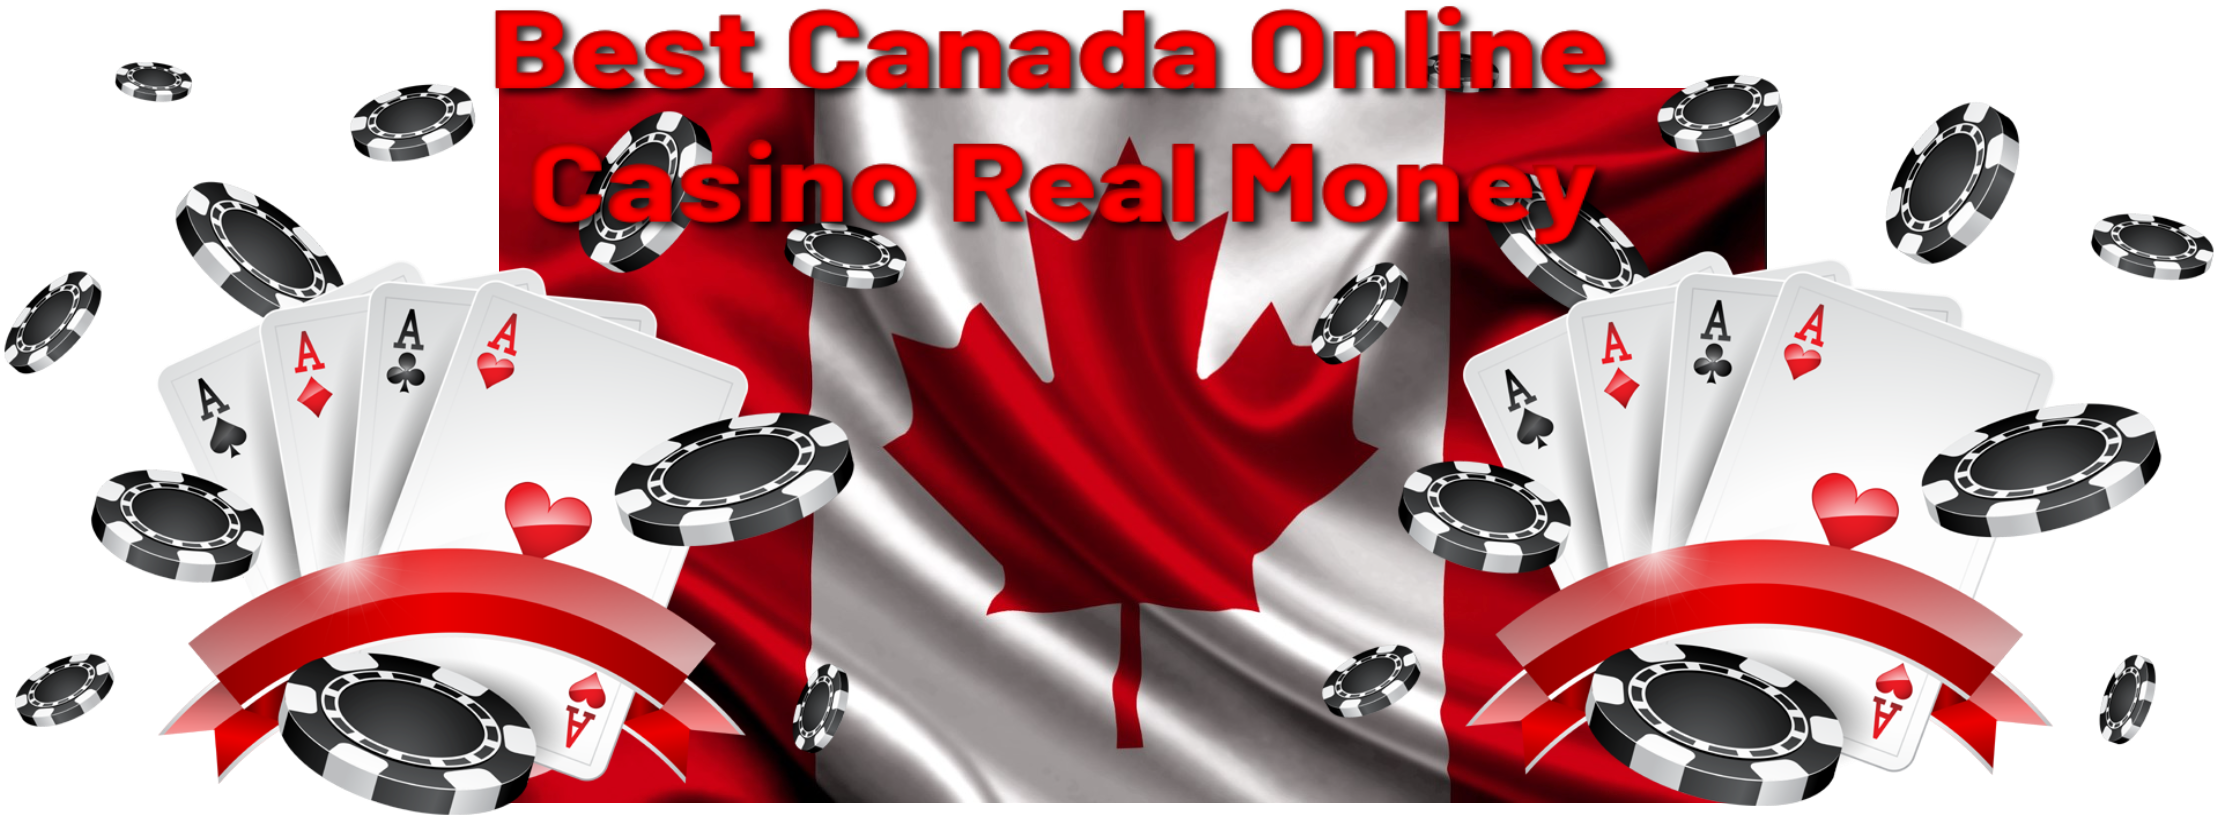 At Last, The Secret To online casino sites Is Revealed